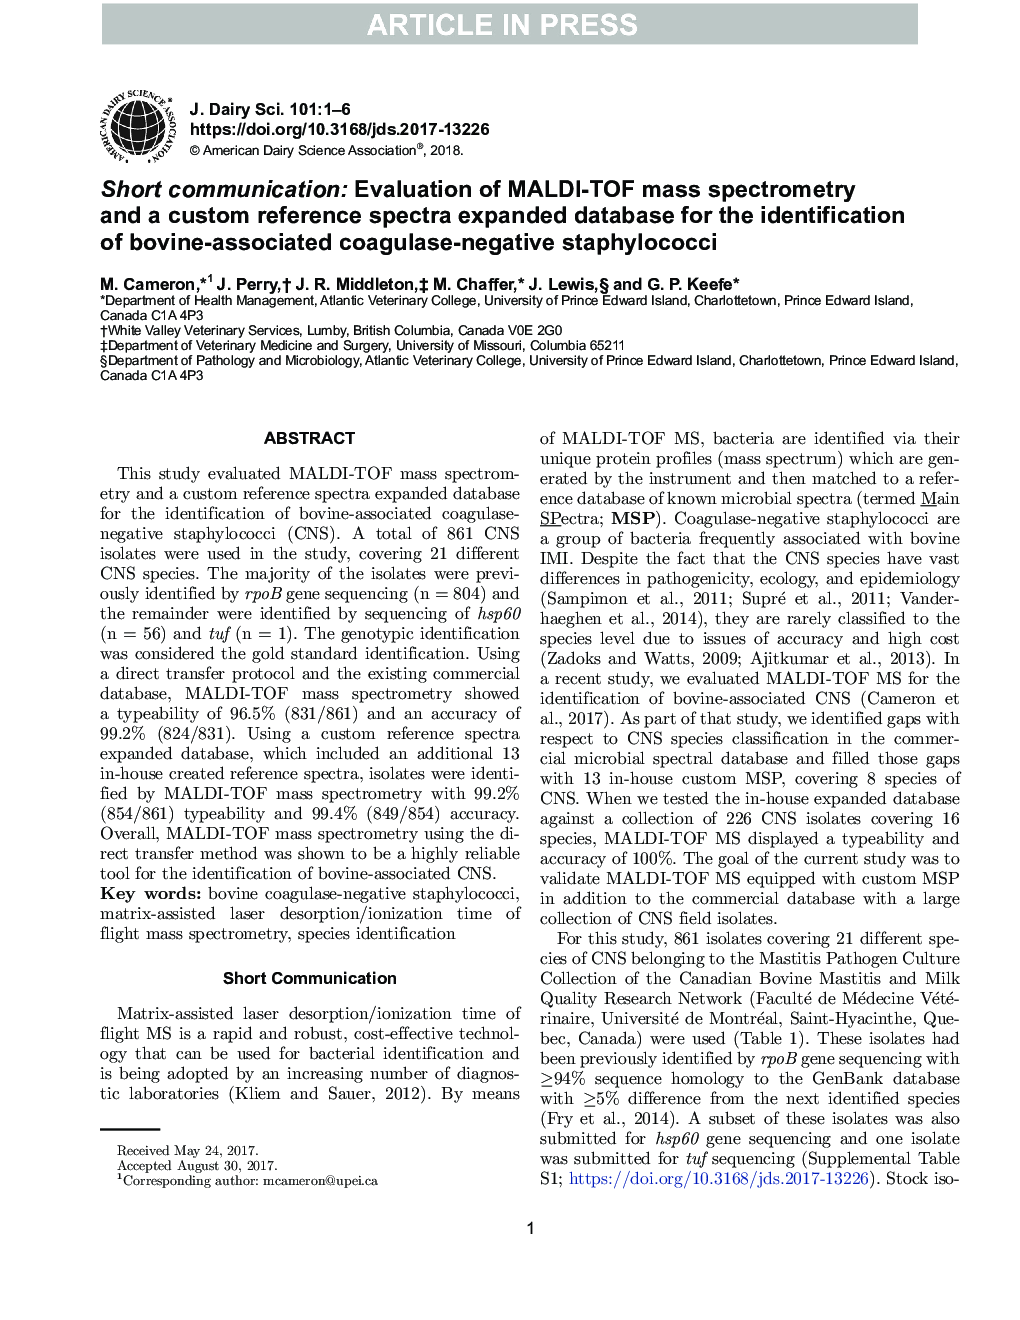 Short communication: Evaluation of MALDI-TOF mass spectrometry and a custom reference spectra expanded database for the identification of bovine-associated coagulase-negative staphylococci